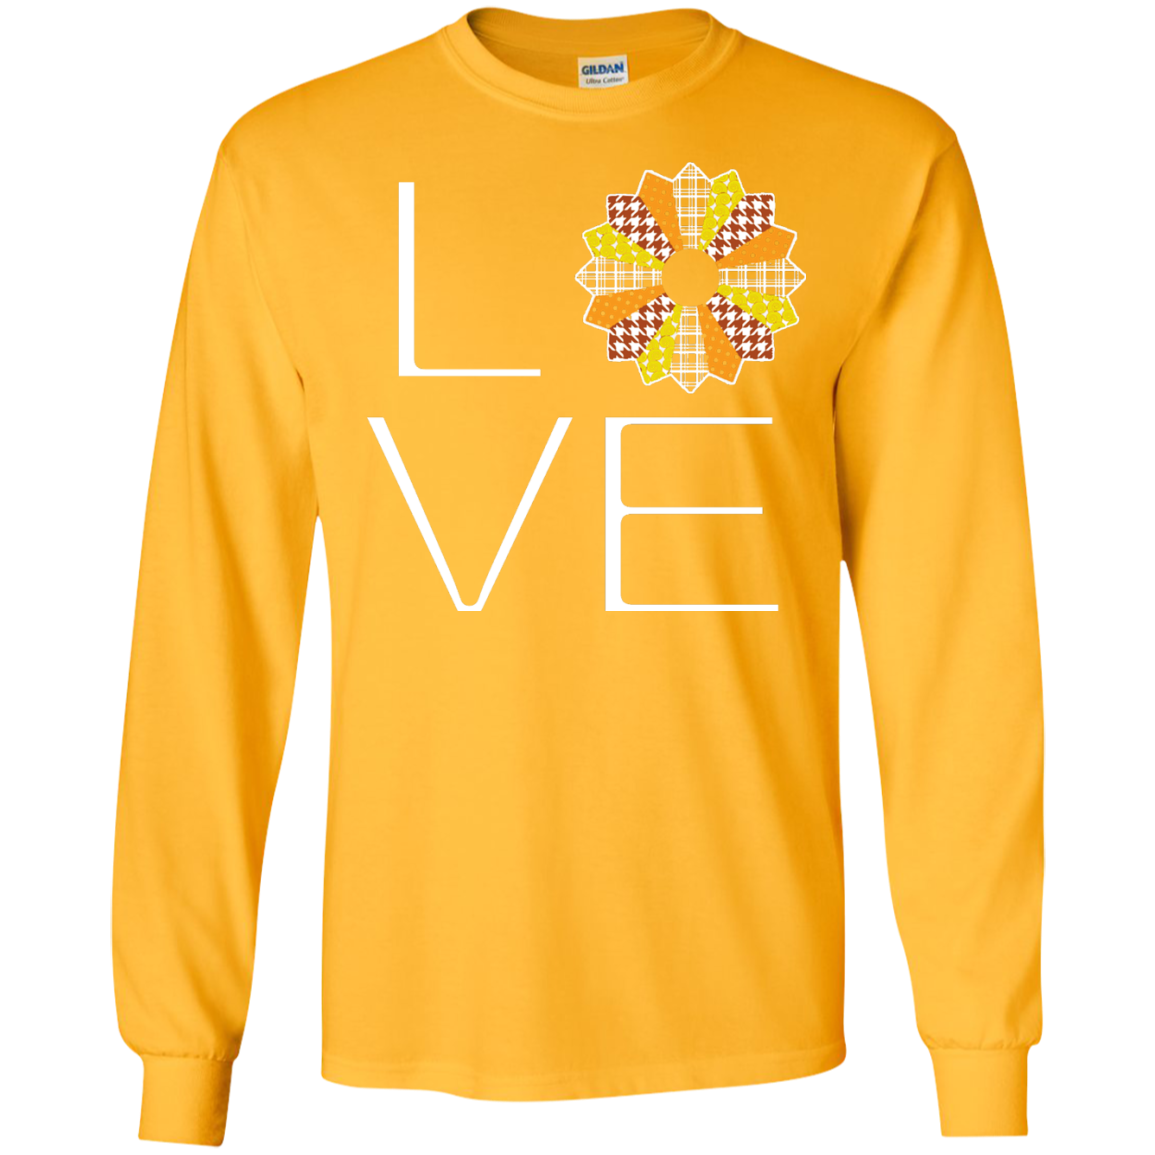 LOVE Quilting (Fall Colors) Long Sleeve Ultra Cotton T-Shirt - Crafter4Life - 1